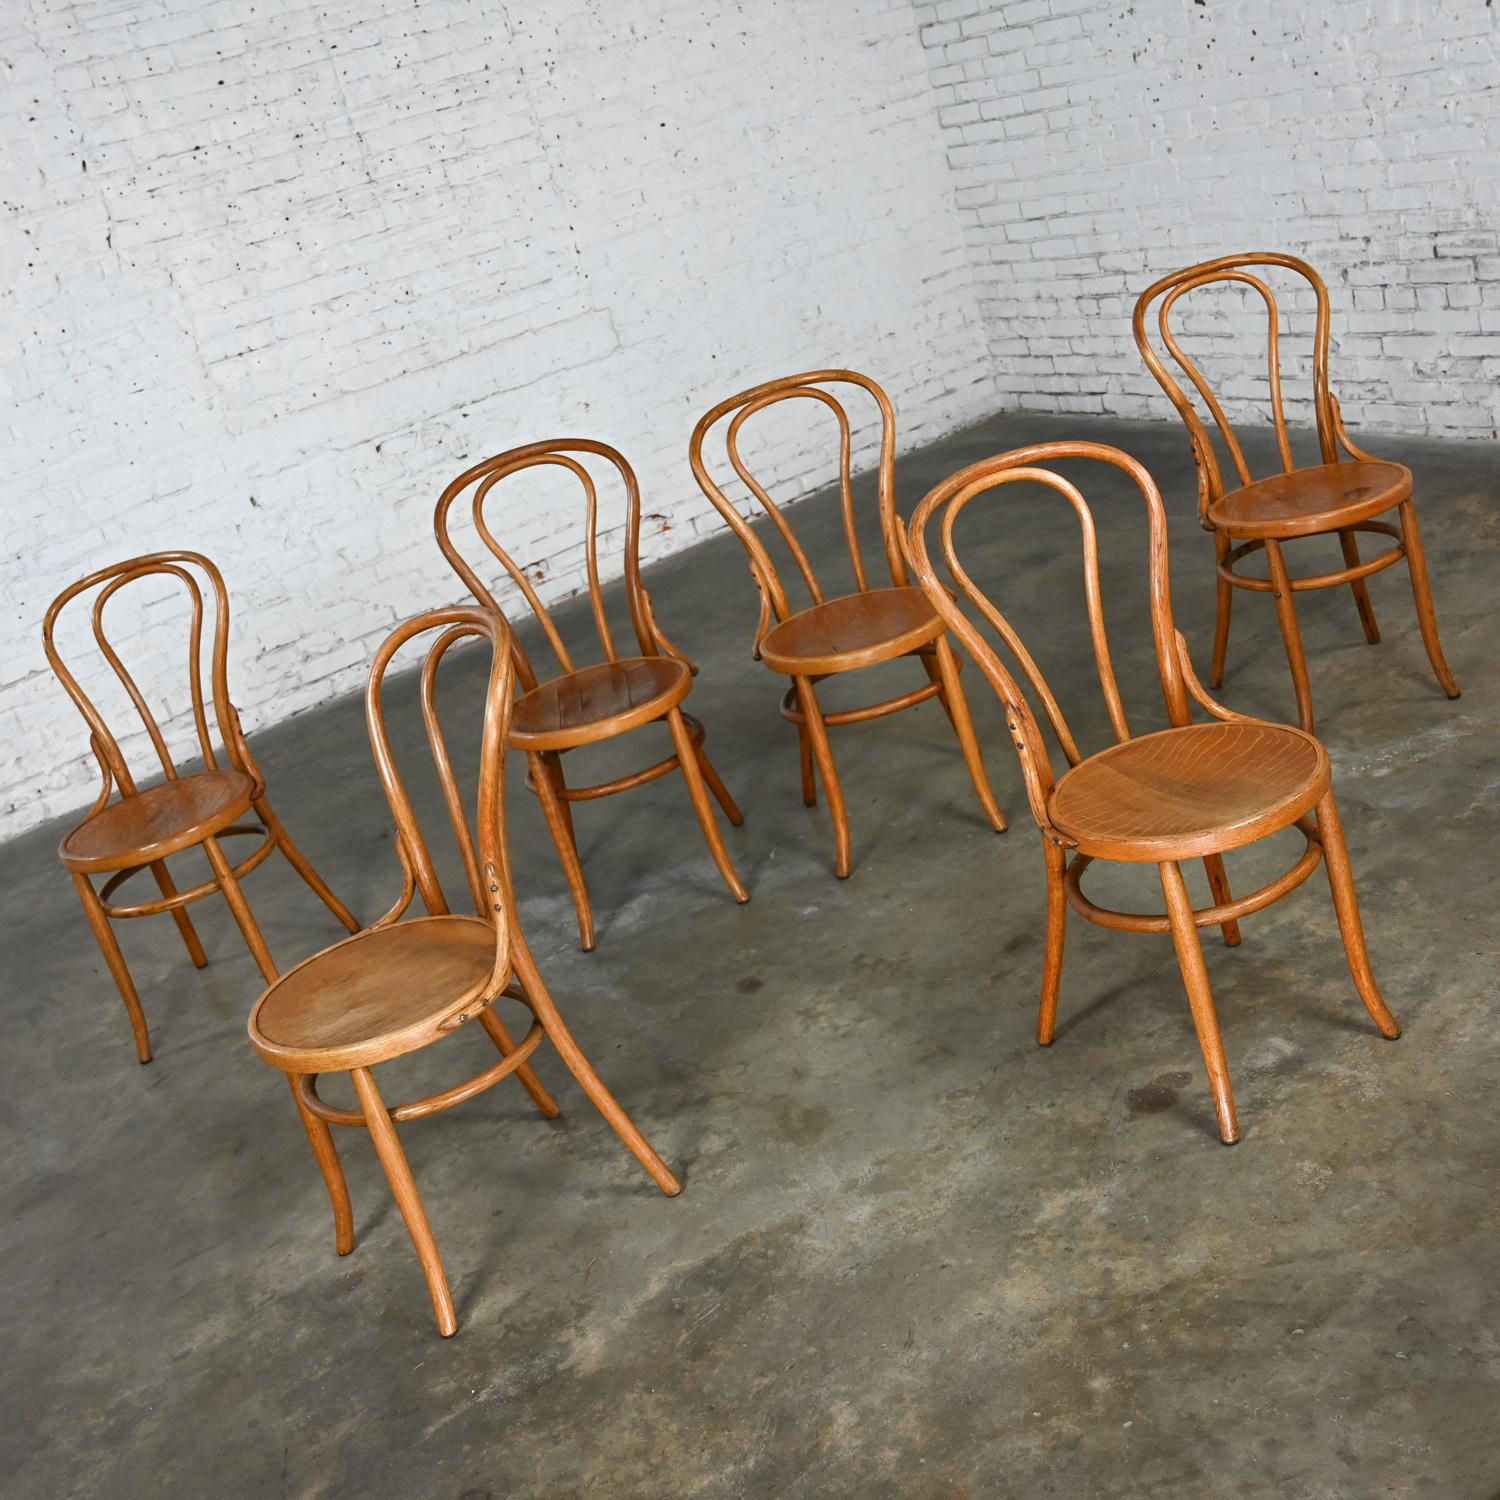 Bauhaus Oak Bentwood Chairs Attributed to Thonet #18 Café Chair Set of 6 For Sale 9